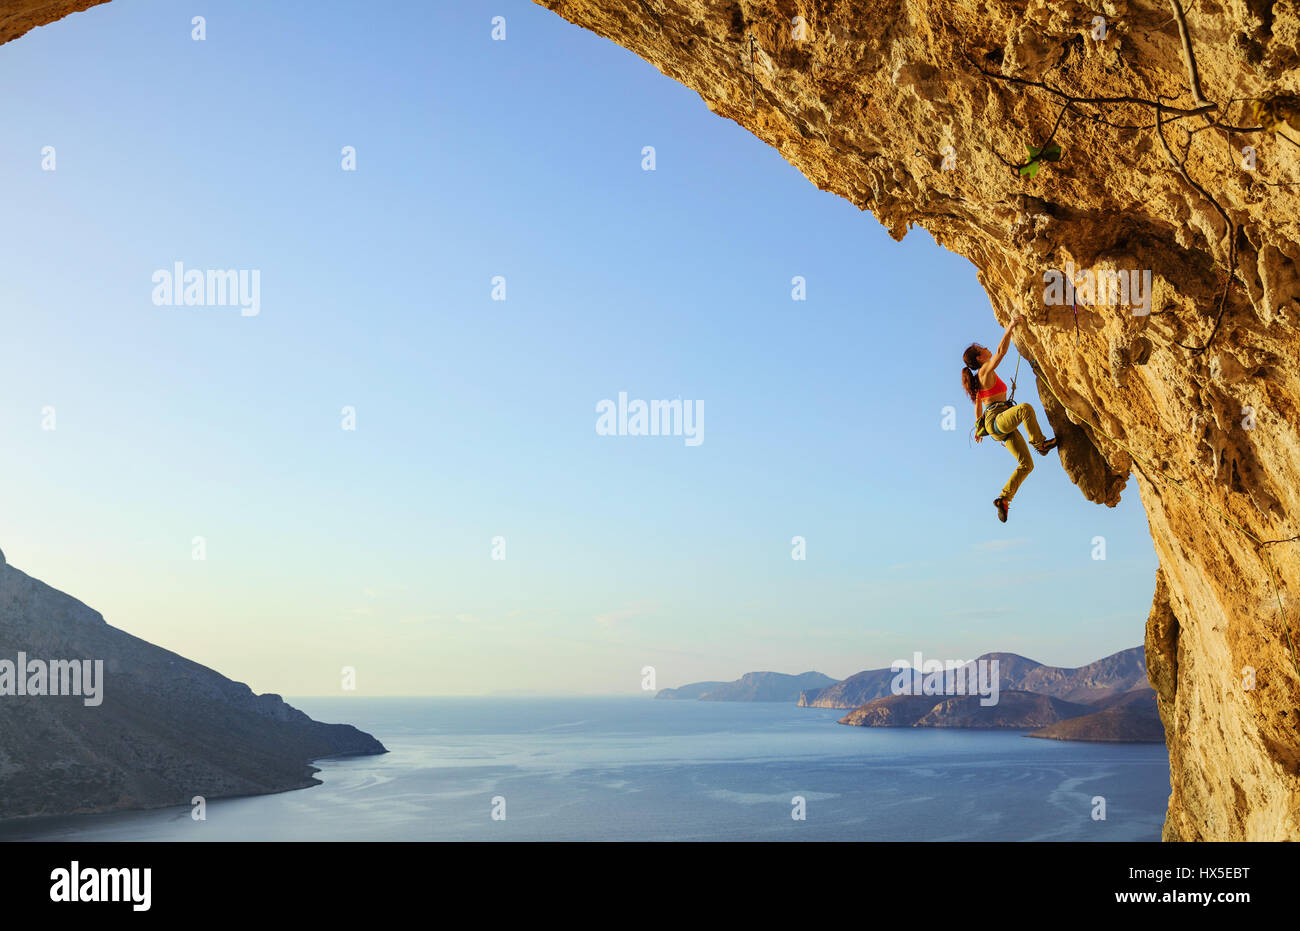 Young woman climbing challenging route in cave at sunset, Kalymnos island, Greece Stock Photo